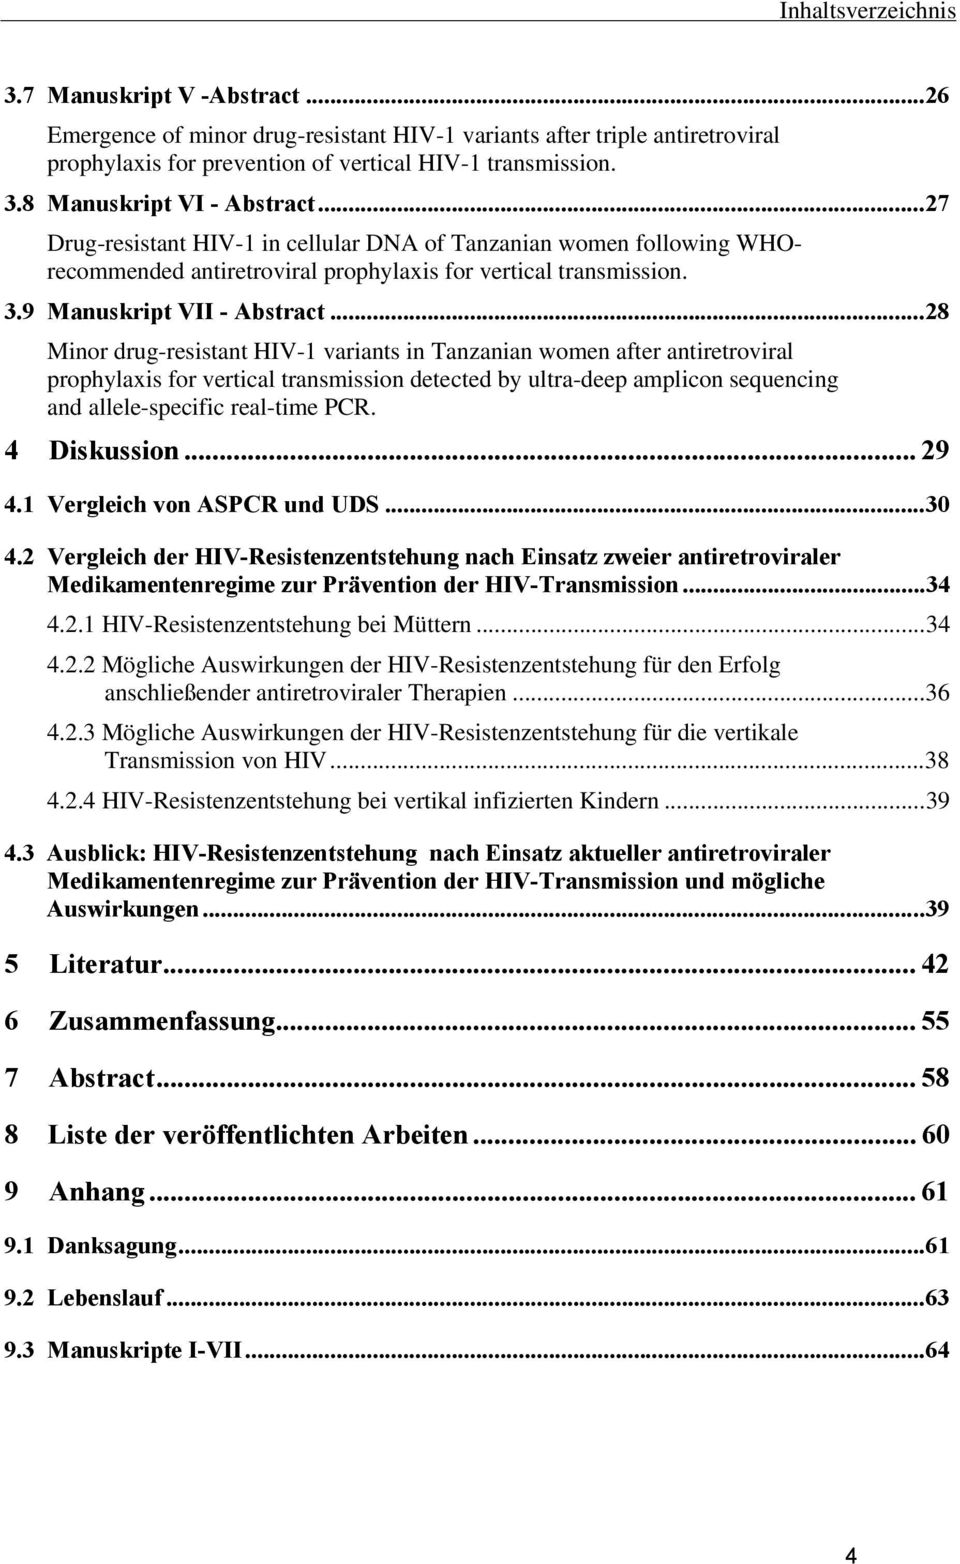 .. 28 Minor drug-resistant HIV-1 variants in Tanzanian women after antiretroviral prophylaxis for vertical transmission detected by ultra-deep amplicon sequencing and allele-specific real-time PCR.